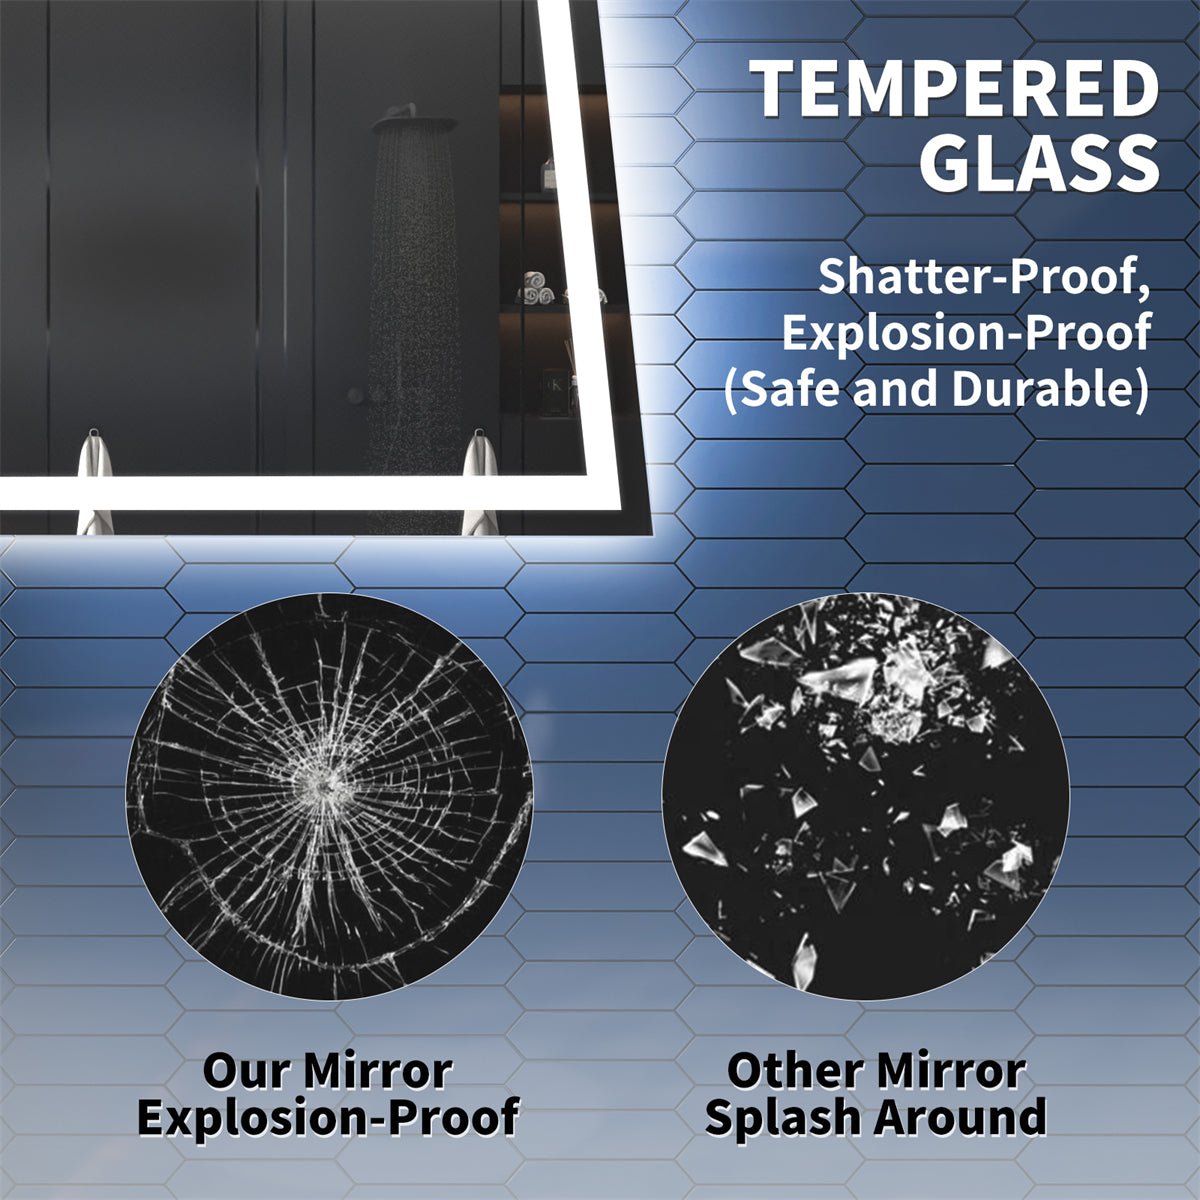 Apex 110" W x 40" H Lighted Bathroom Large Light Led Mirror,Anti Fog,Dimmable,Dual Lighting Mode,Tempered Glass